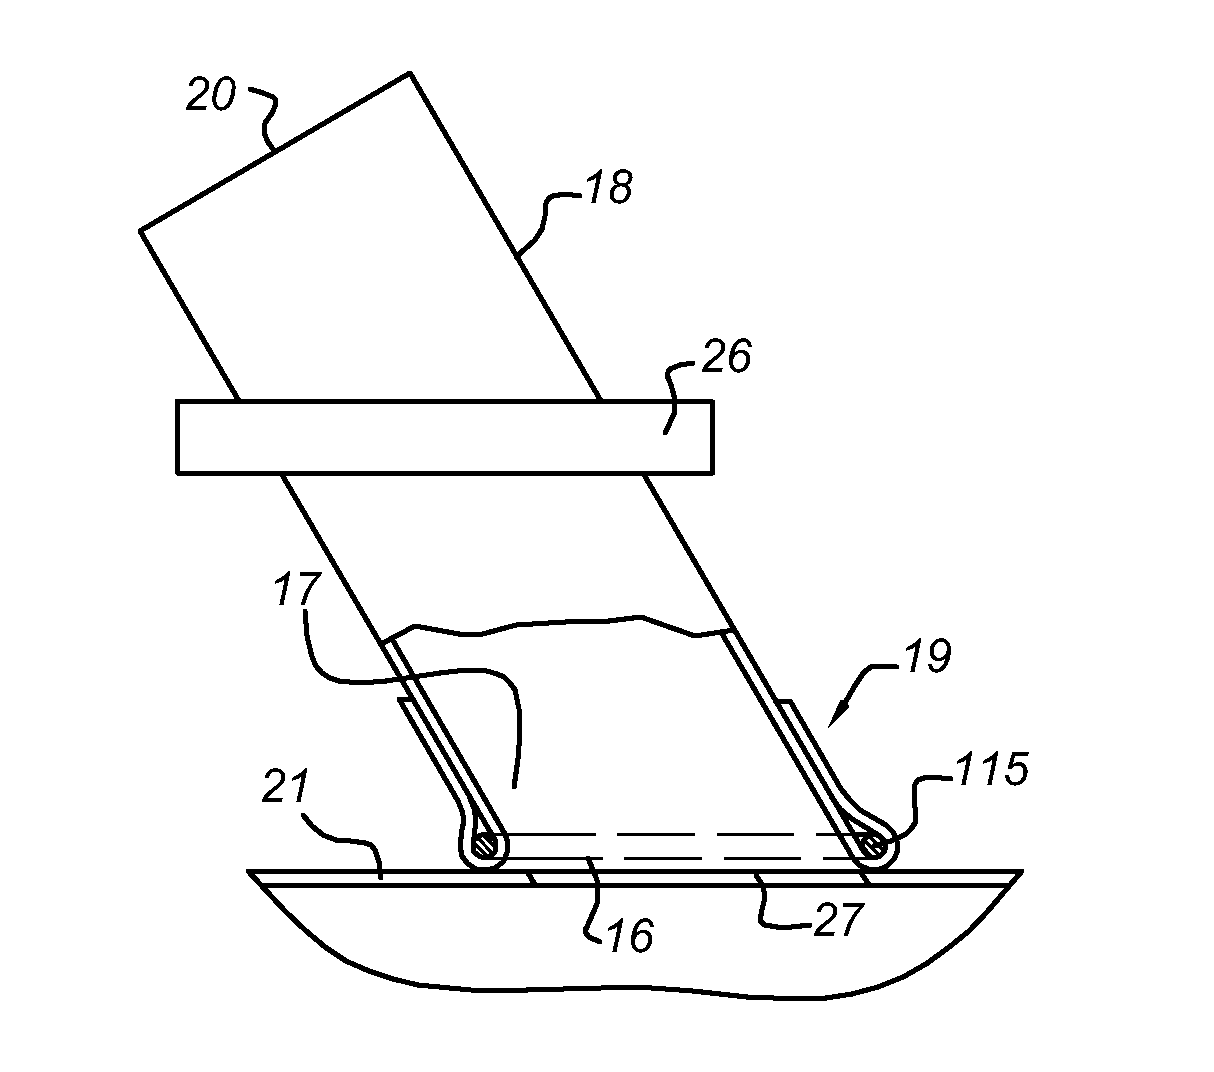 Laser catheter for bypass surgery and assembly comprising said catheter